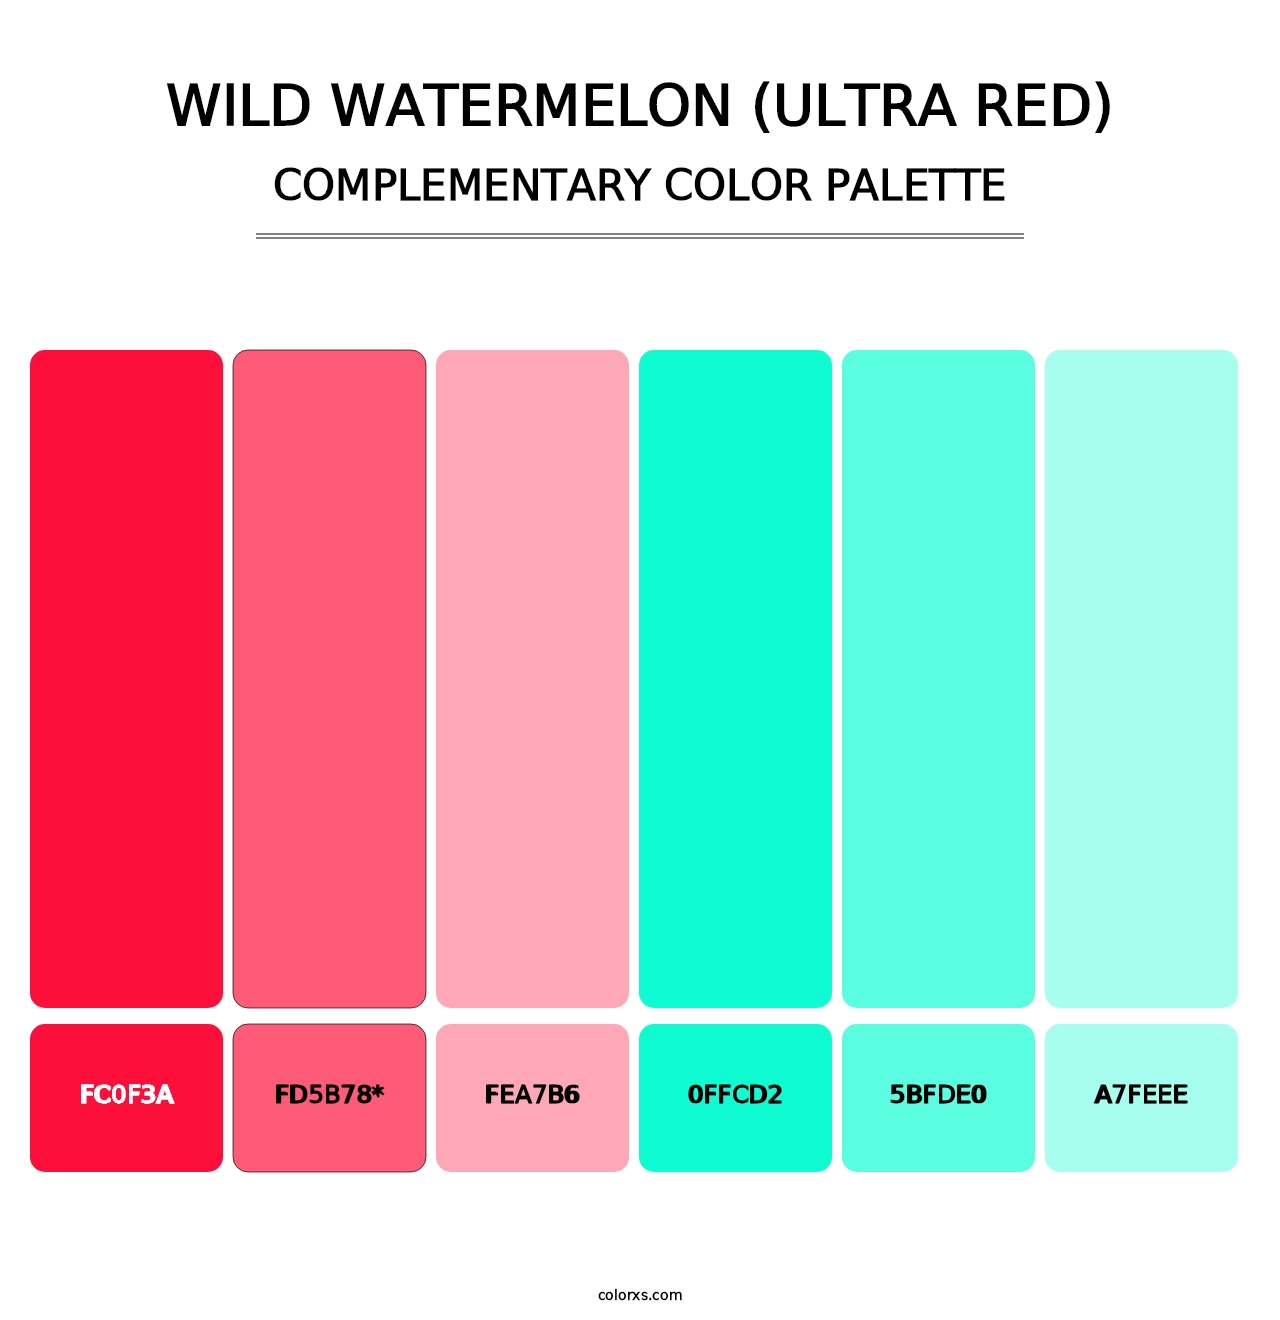 Wild Watermelon (Ultra Red) - Complementary Color Palette